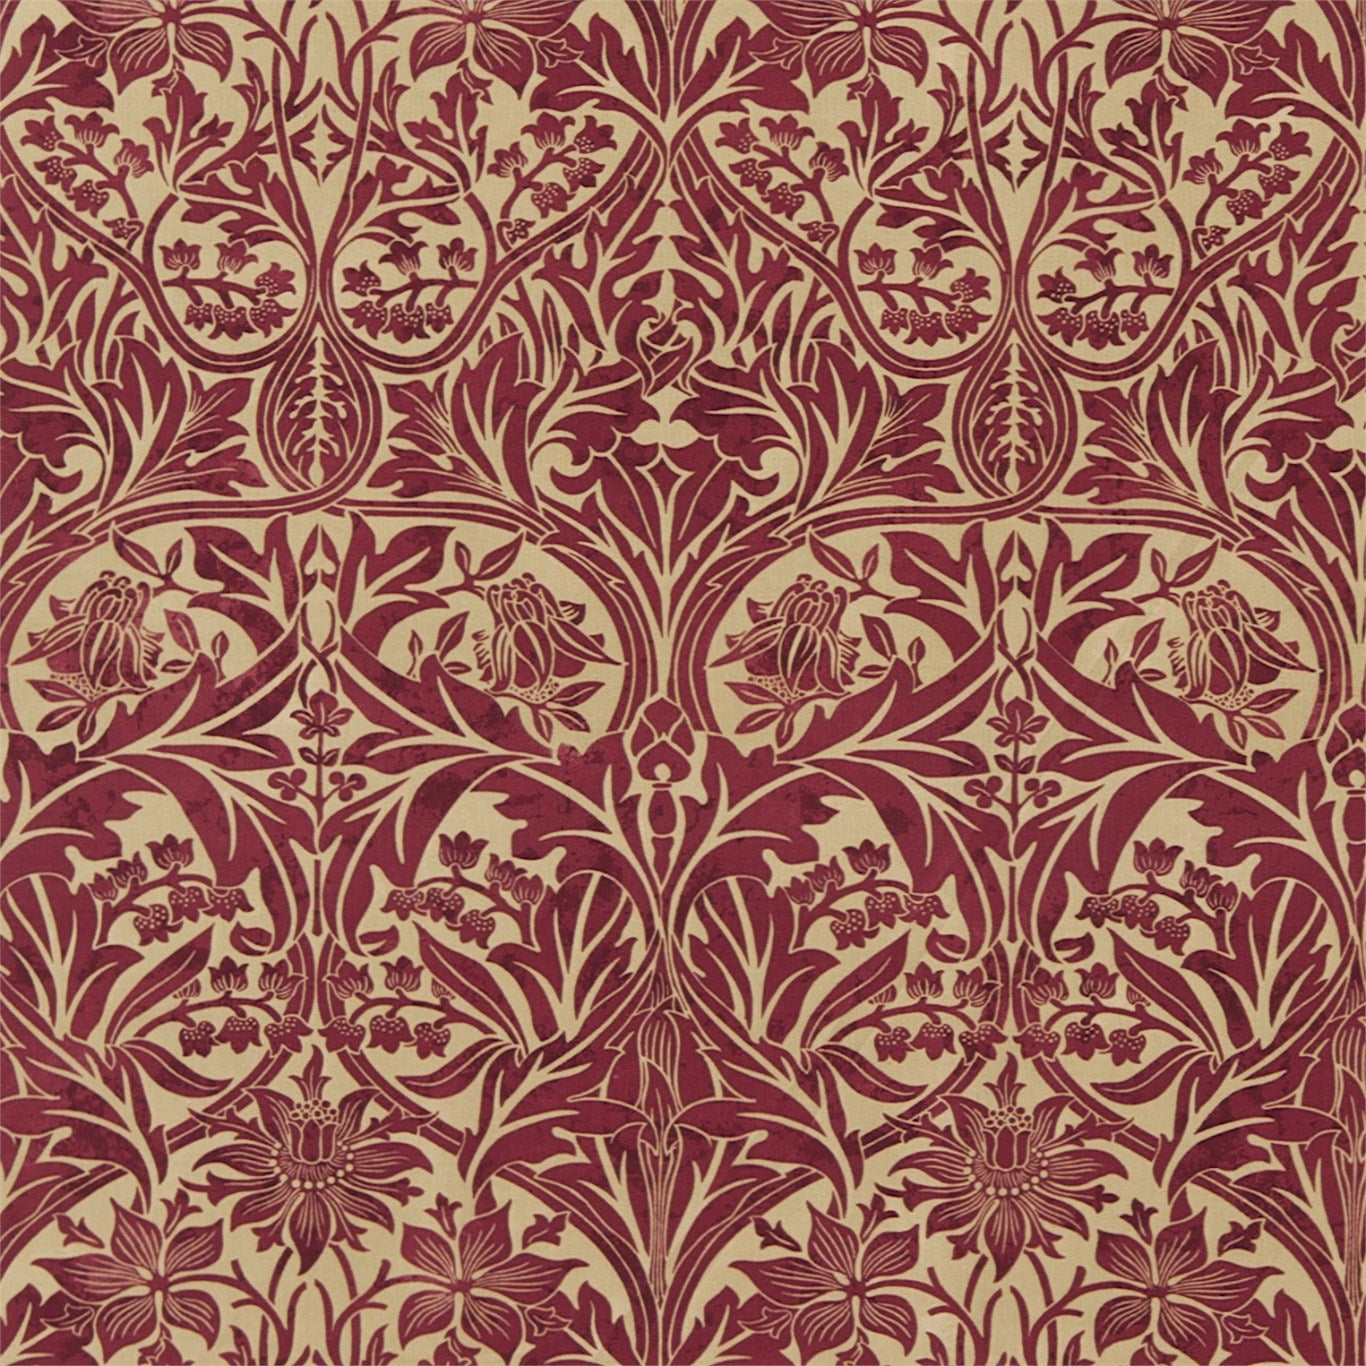 Bluebell Fabric by Morris & Co. - DM6F220332 - Claret/Gold